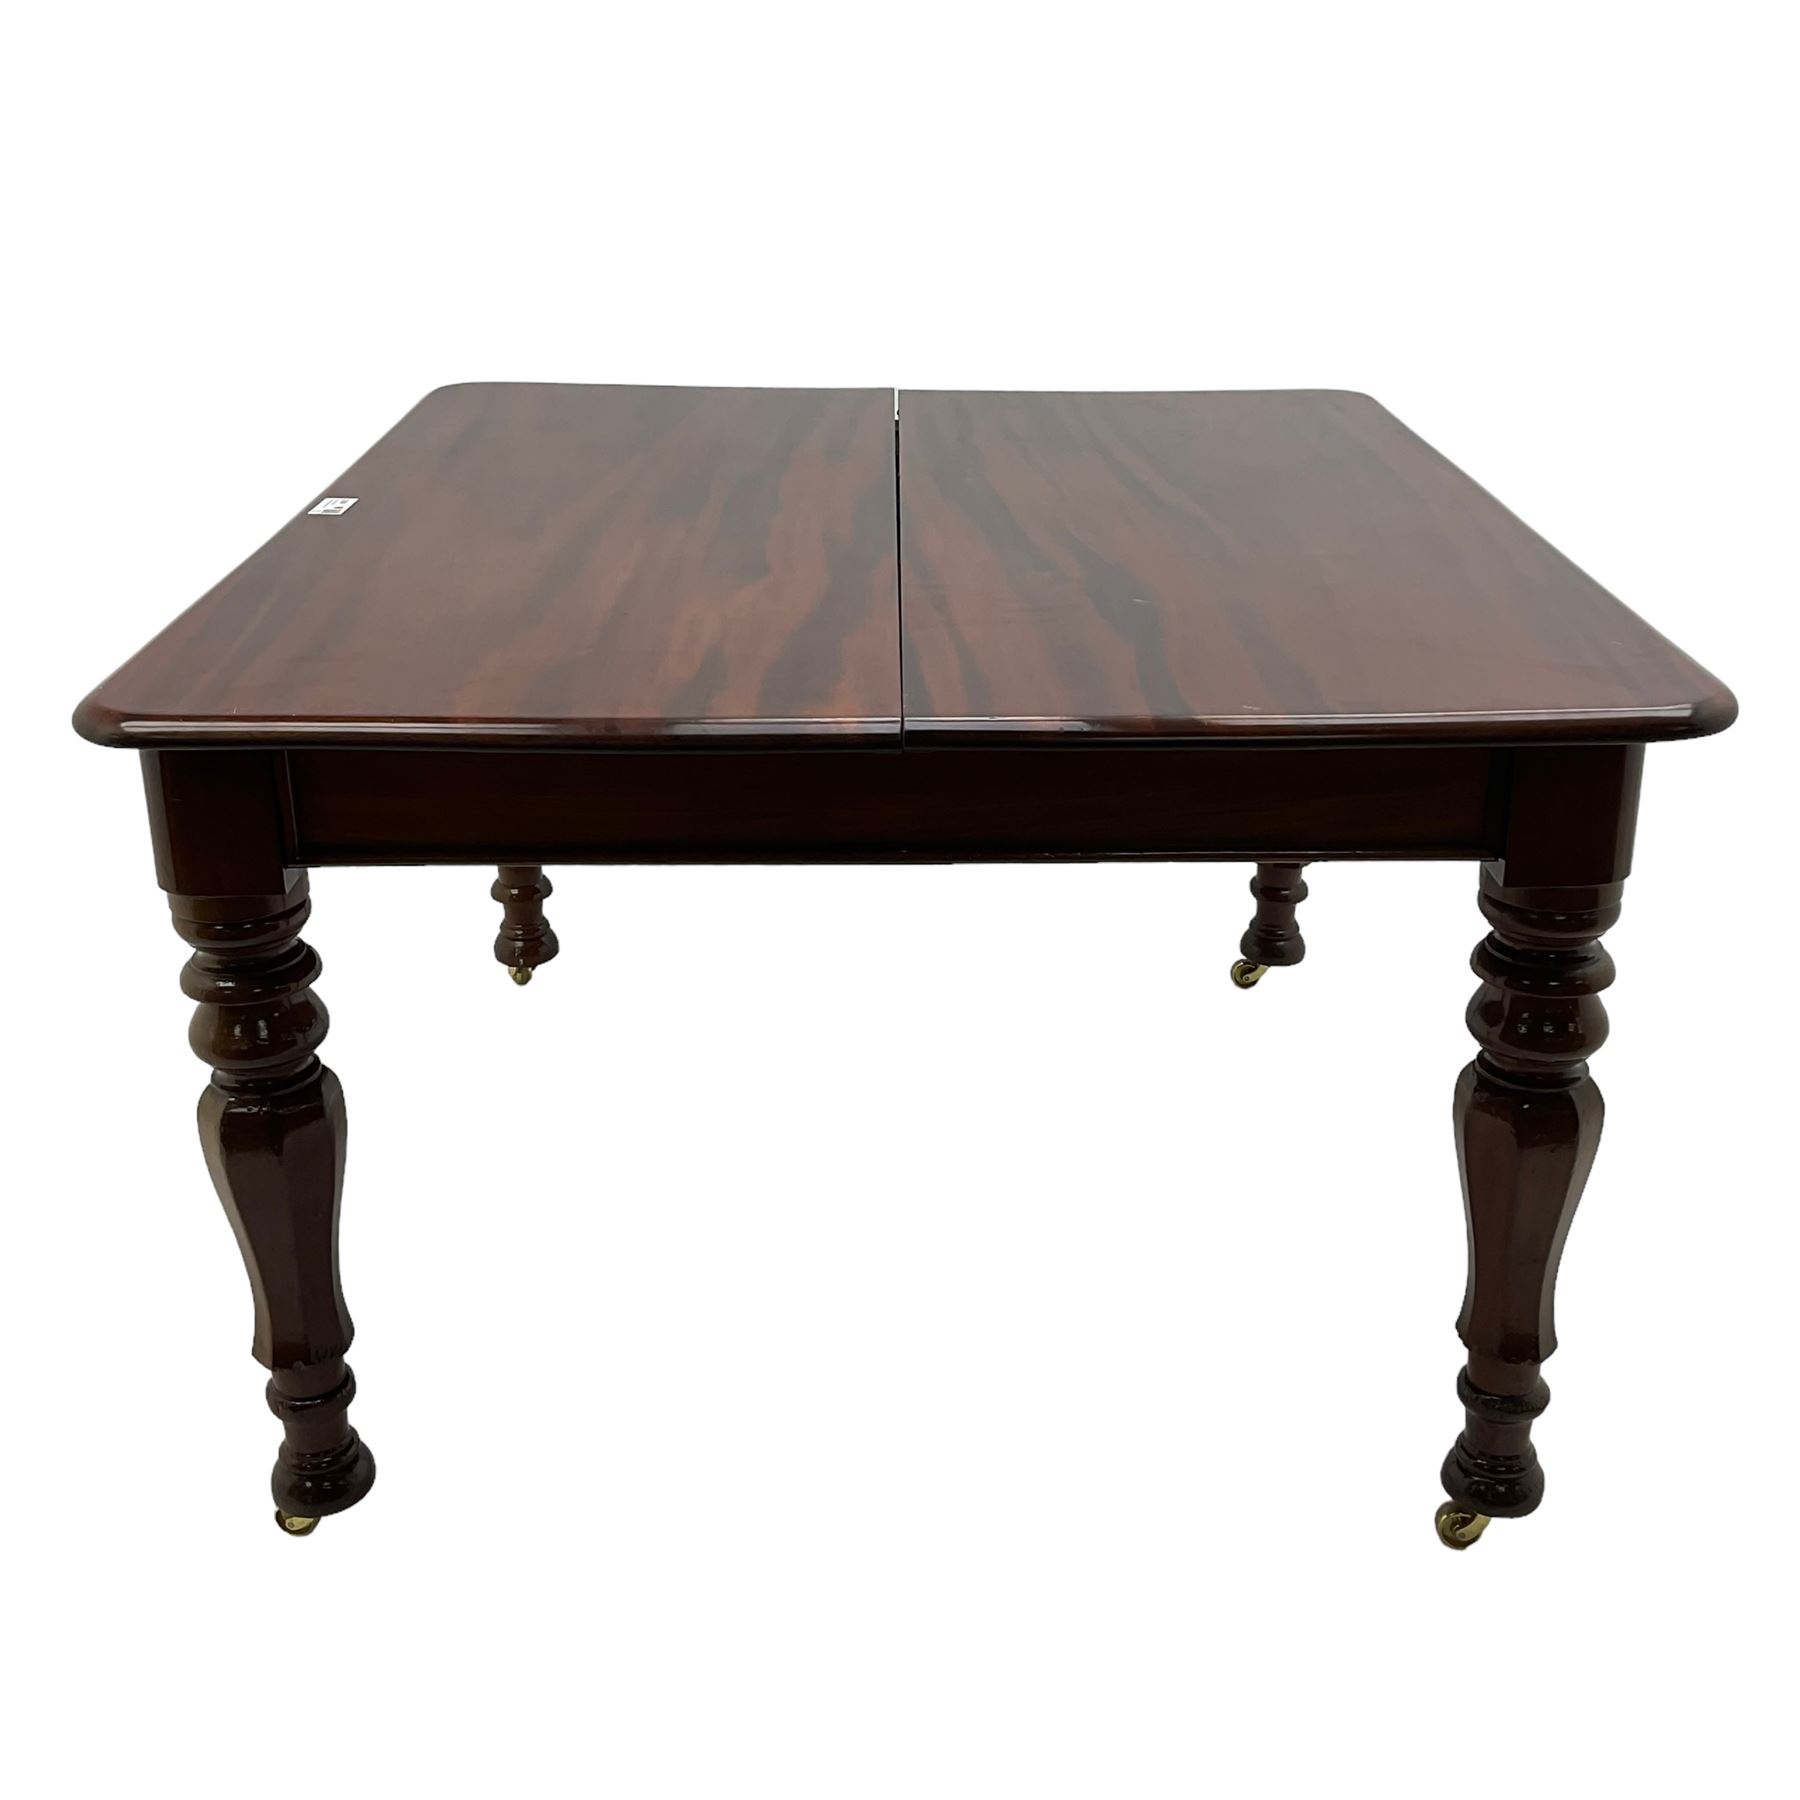 19th century mahogany extending dining table with three additional leaves - Bild 8 aus 15